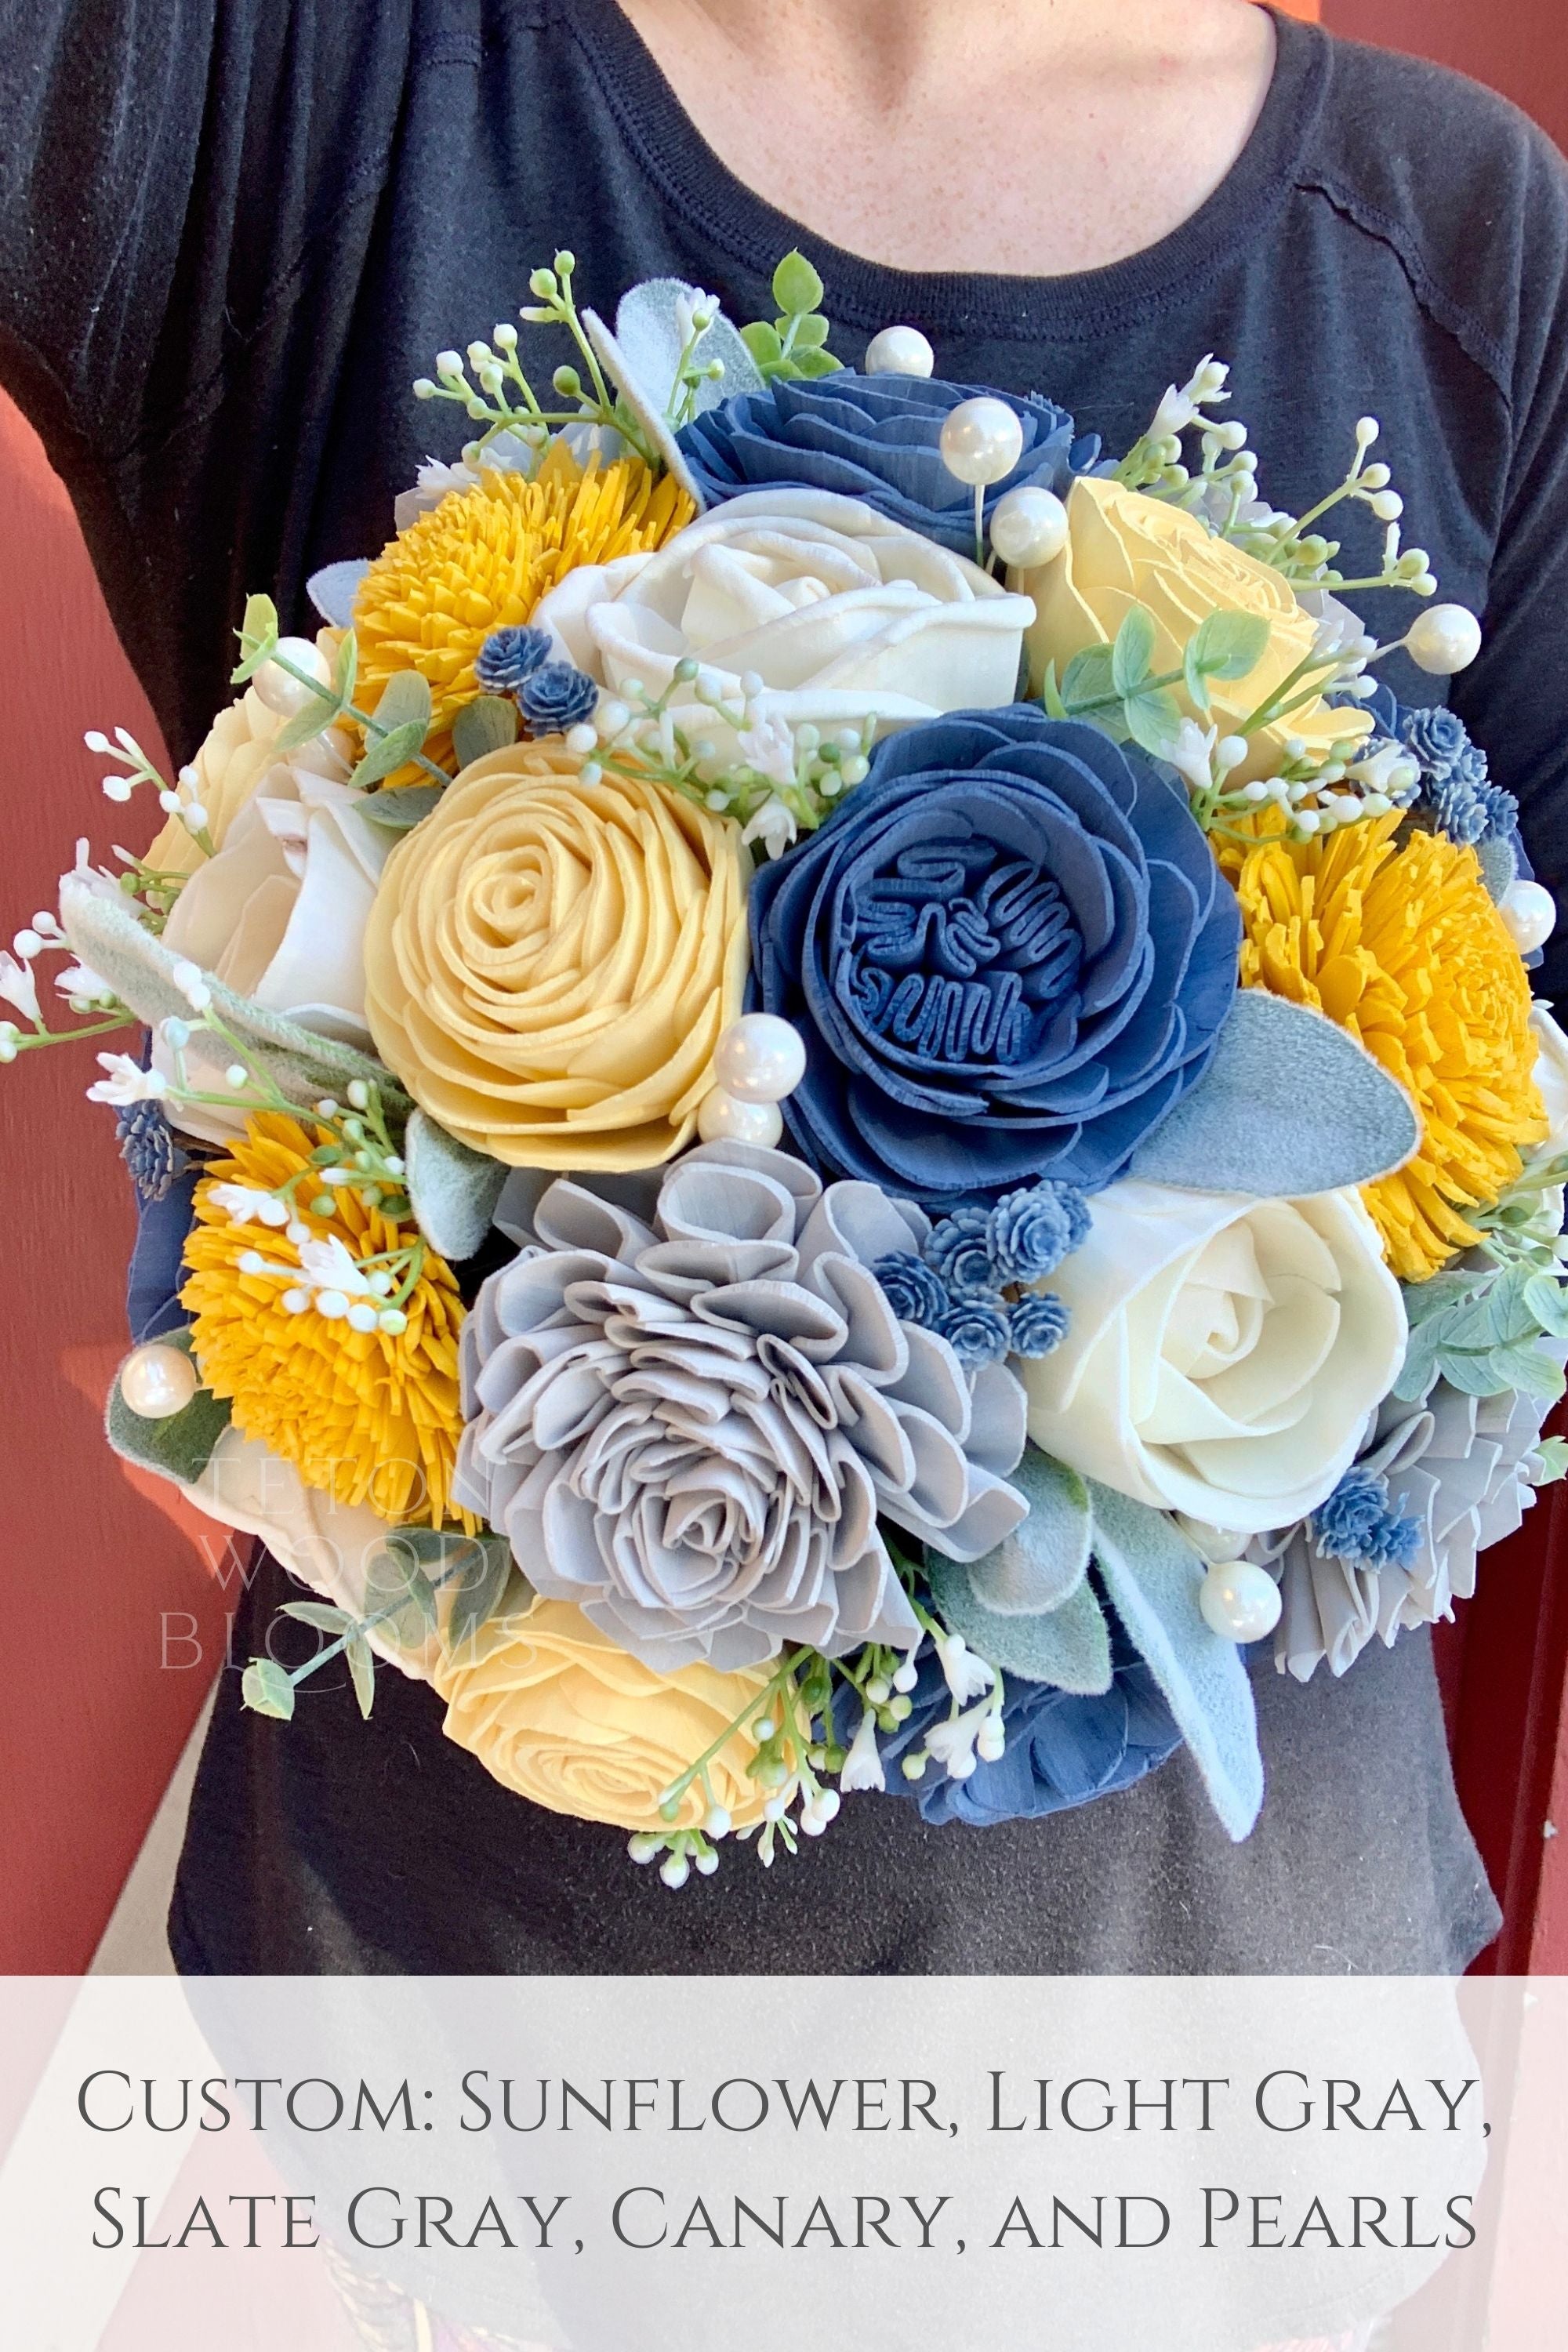 Rustic Blue, Gray and Yellow Bouquet